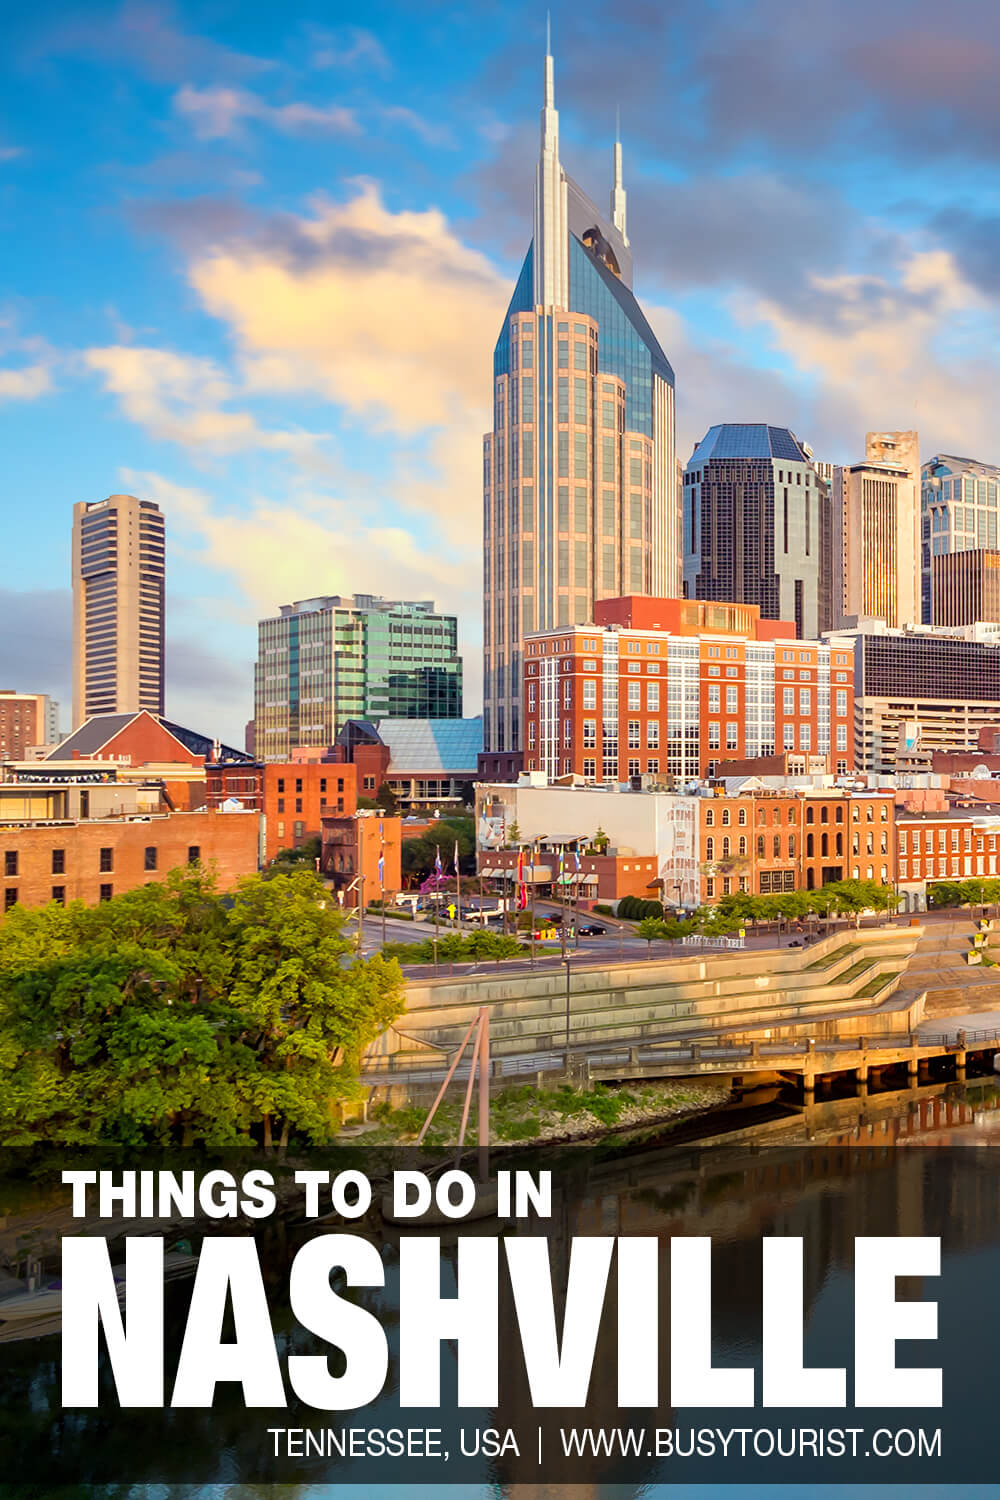 30 Best & Fun Things To Do In Nashville (TN) Attractions & Activities